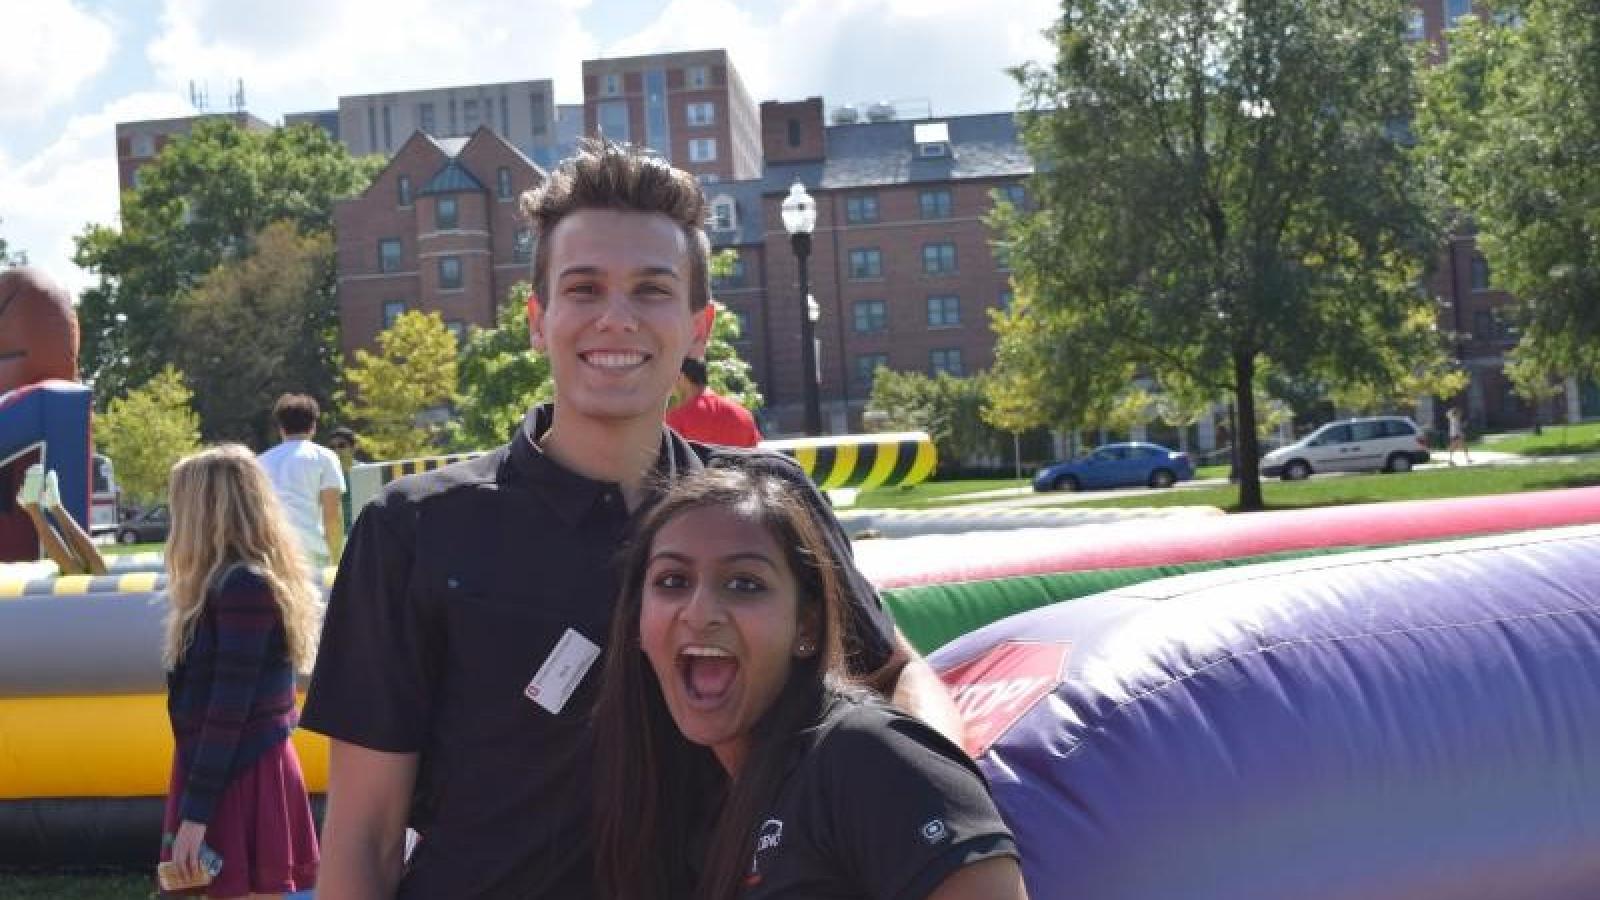 Two Students in front of inflatable at field day